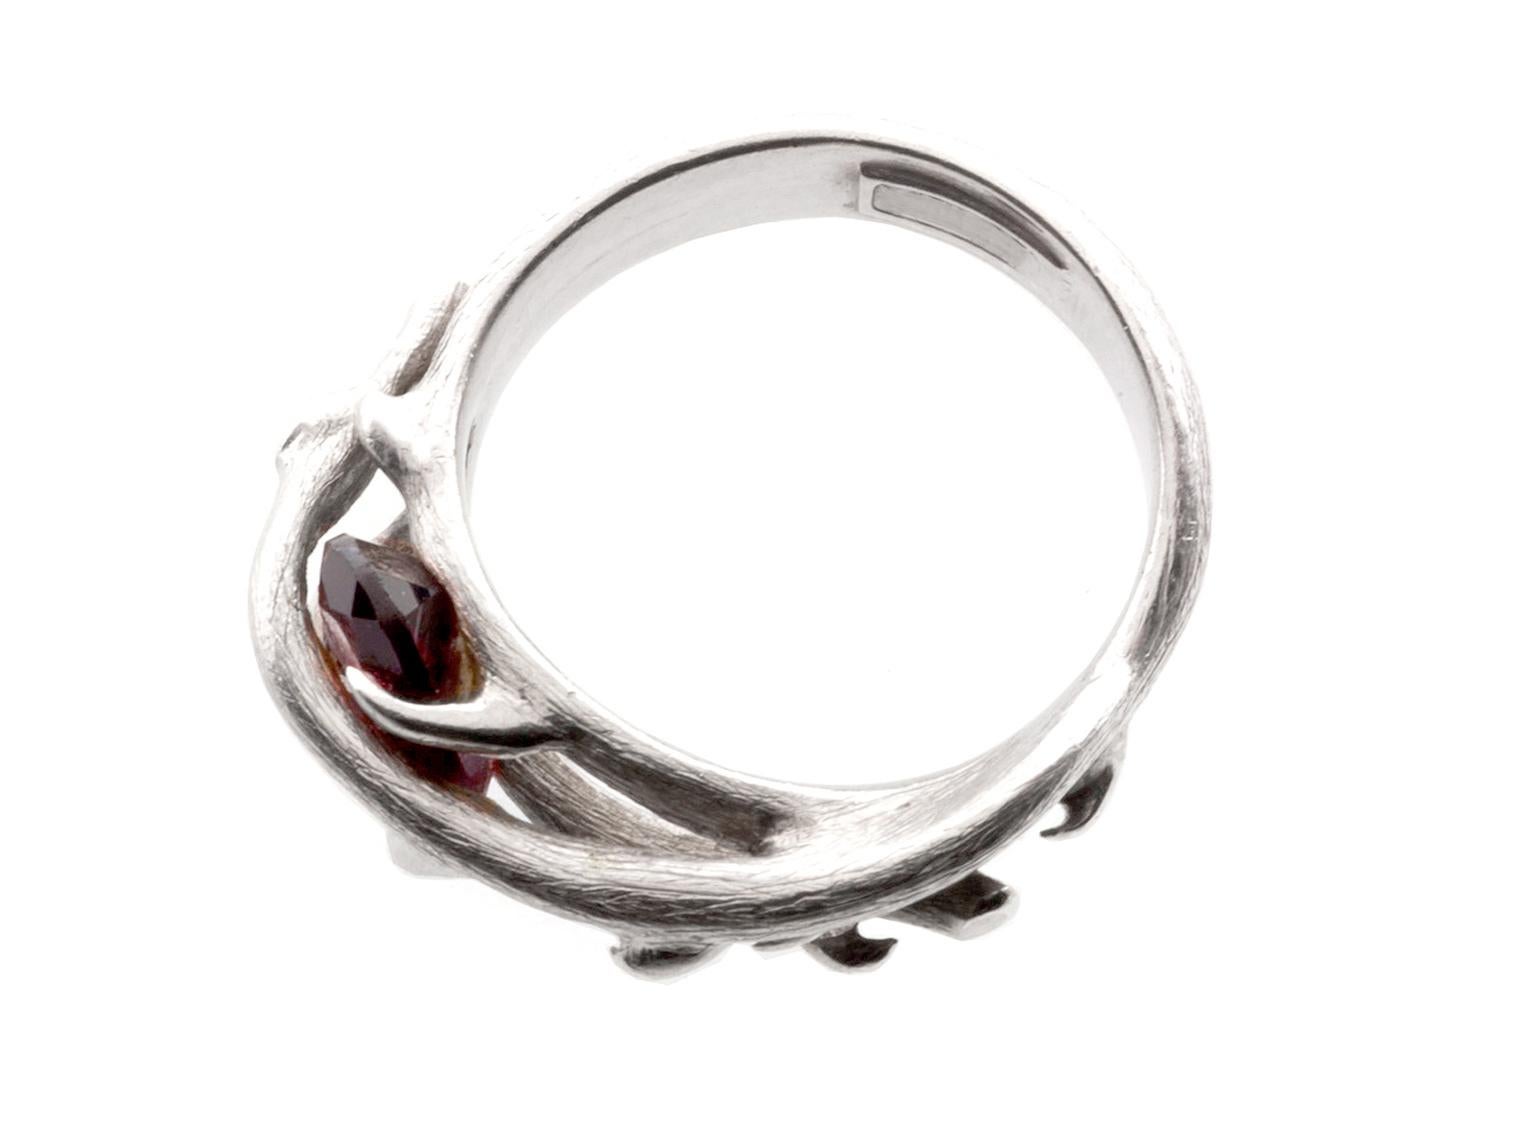 This contemporary Wild Rose ring in sterling silver belongs to the Rose collection, which was featured in Harper's Bazaar UA magazine.

The ring features an interesting wood texture and a unique gem placement, with an 8x6 mm garnet as the